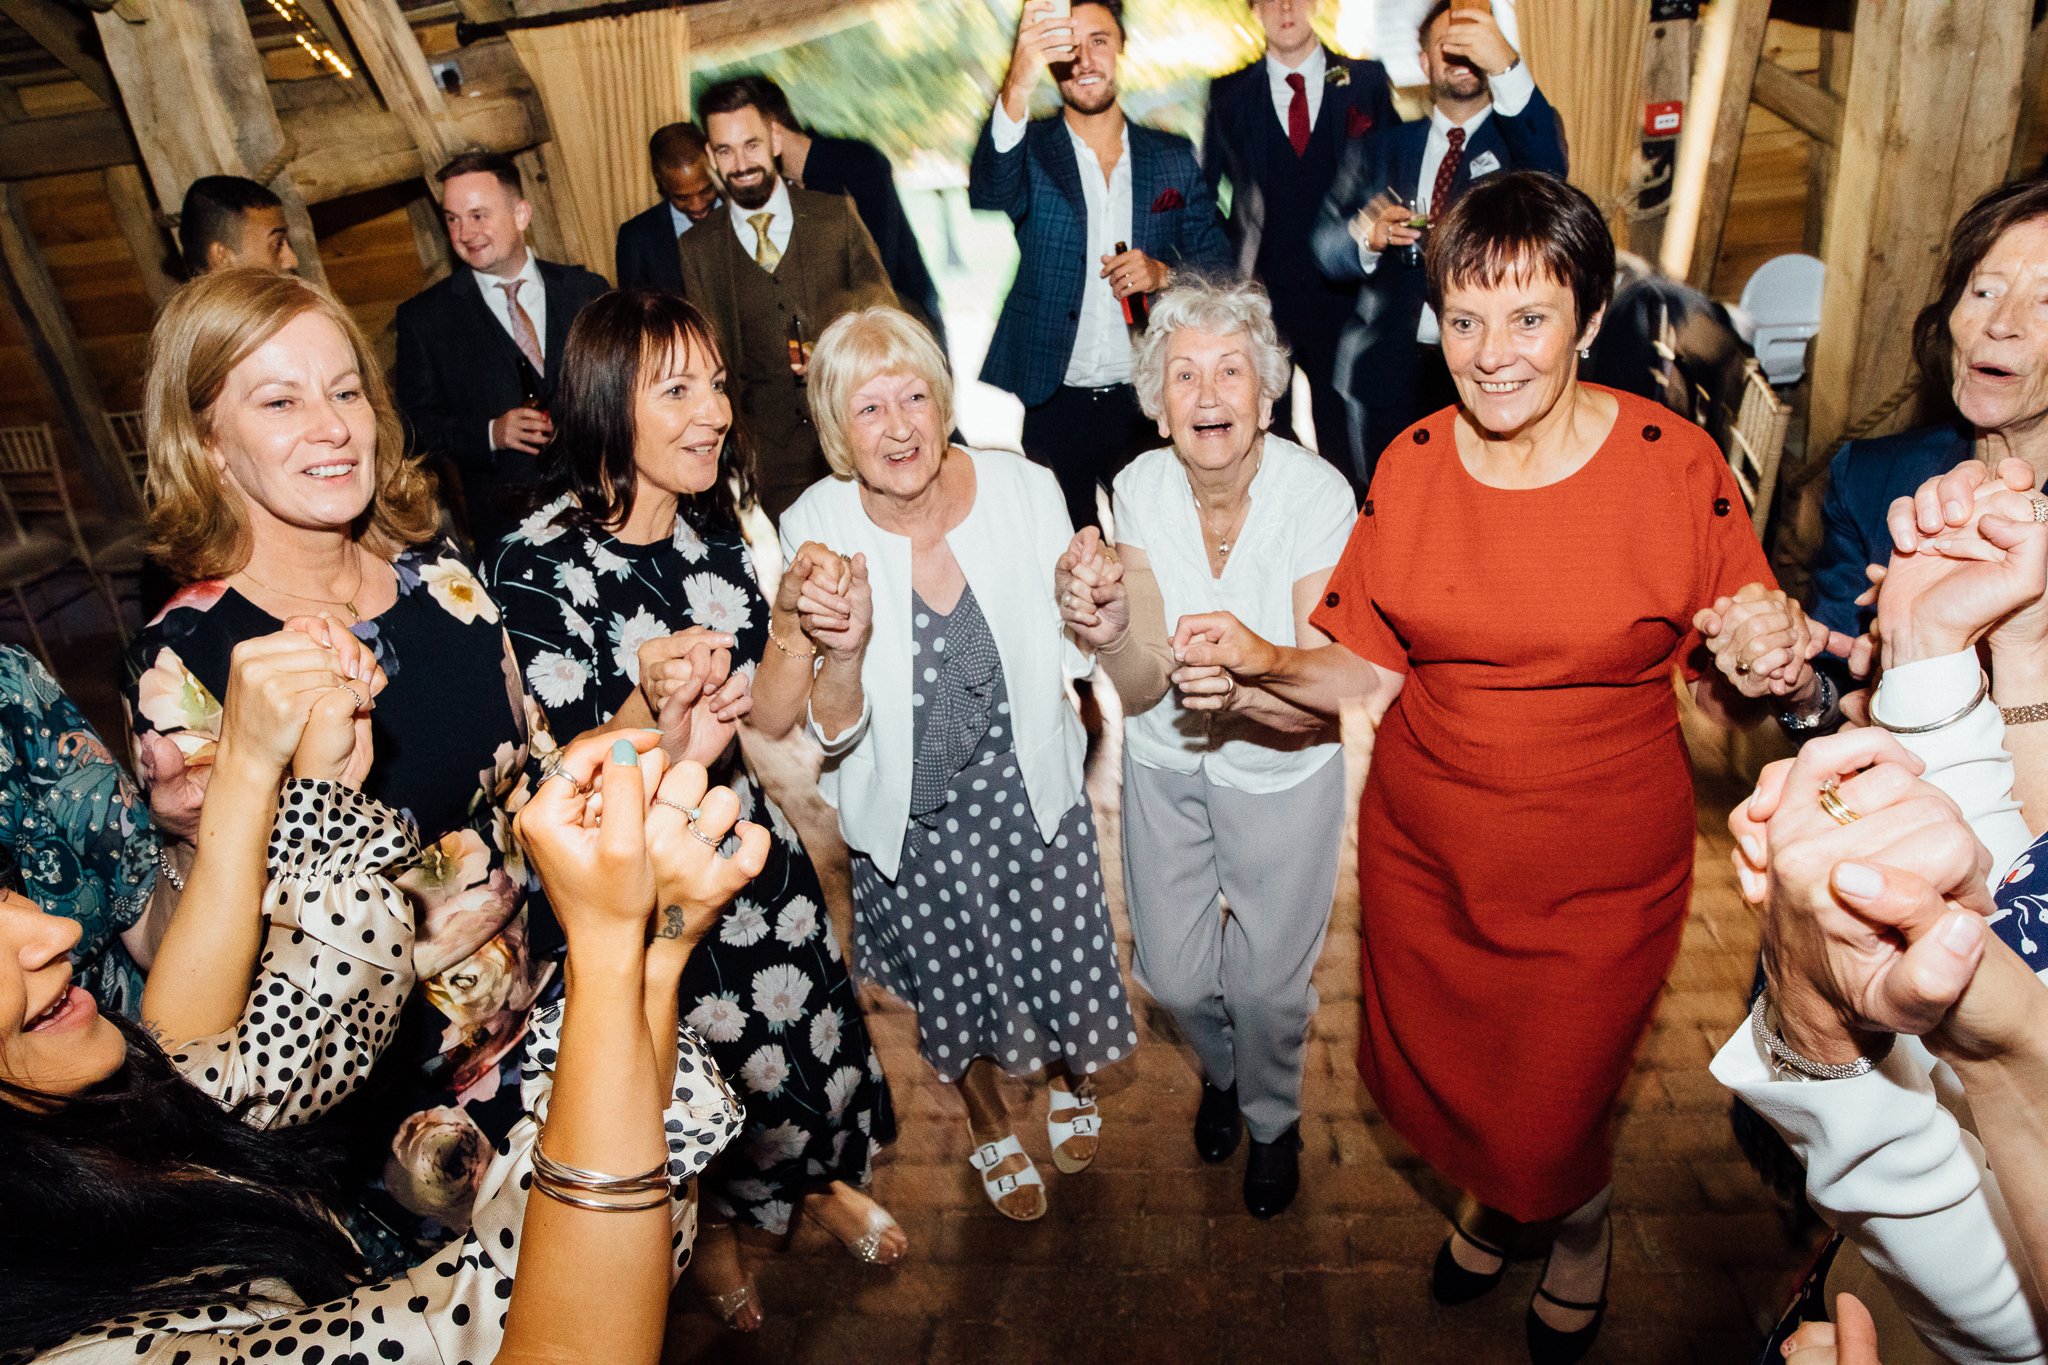  Female guests dance at Gildings Barns in Newdigate Surrey 